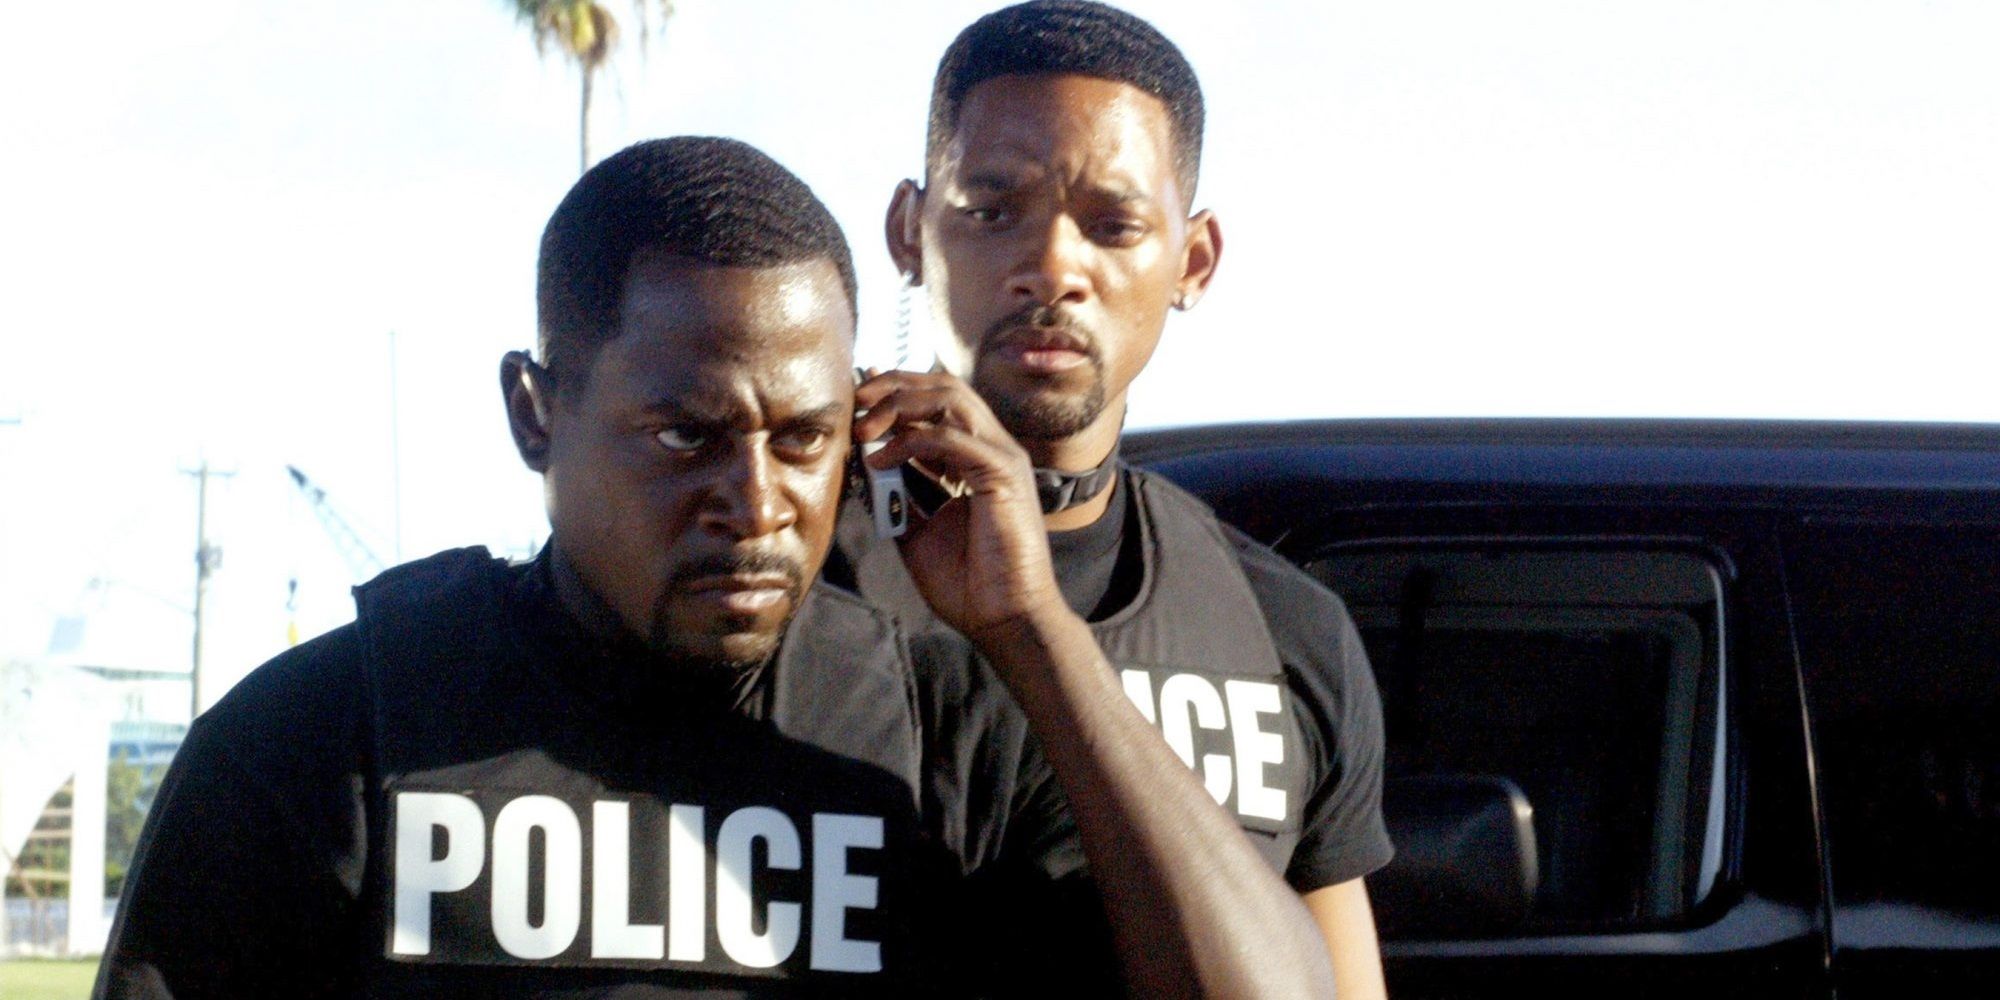 I Can't Believe How Low Bad Boys 2's Rotten Tomatoes Score Is - What The Hell Happened?